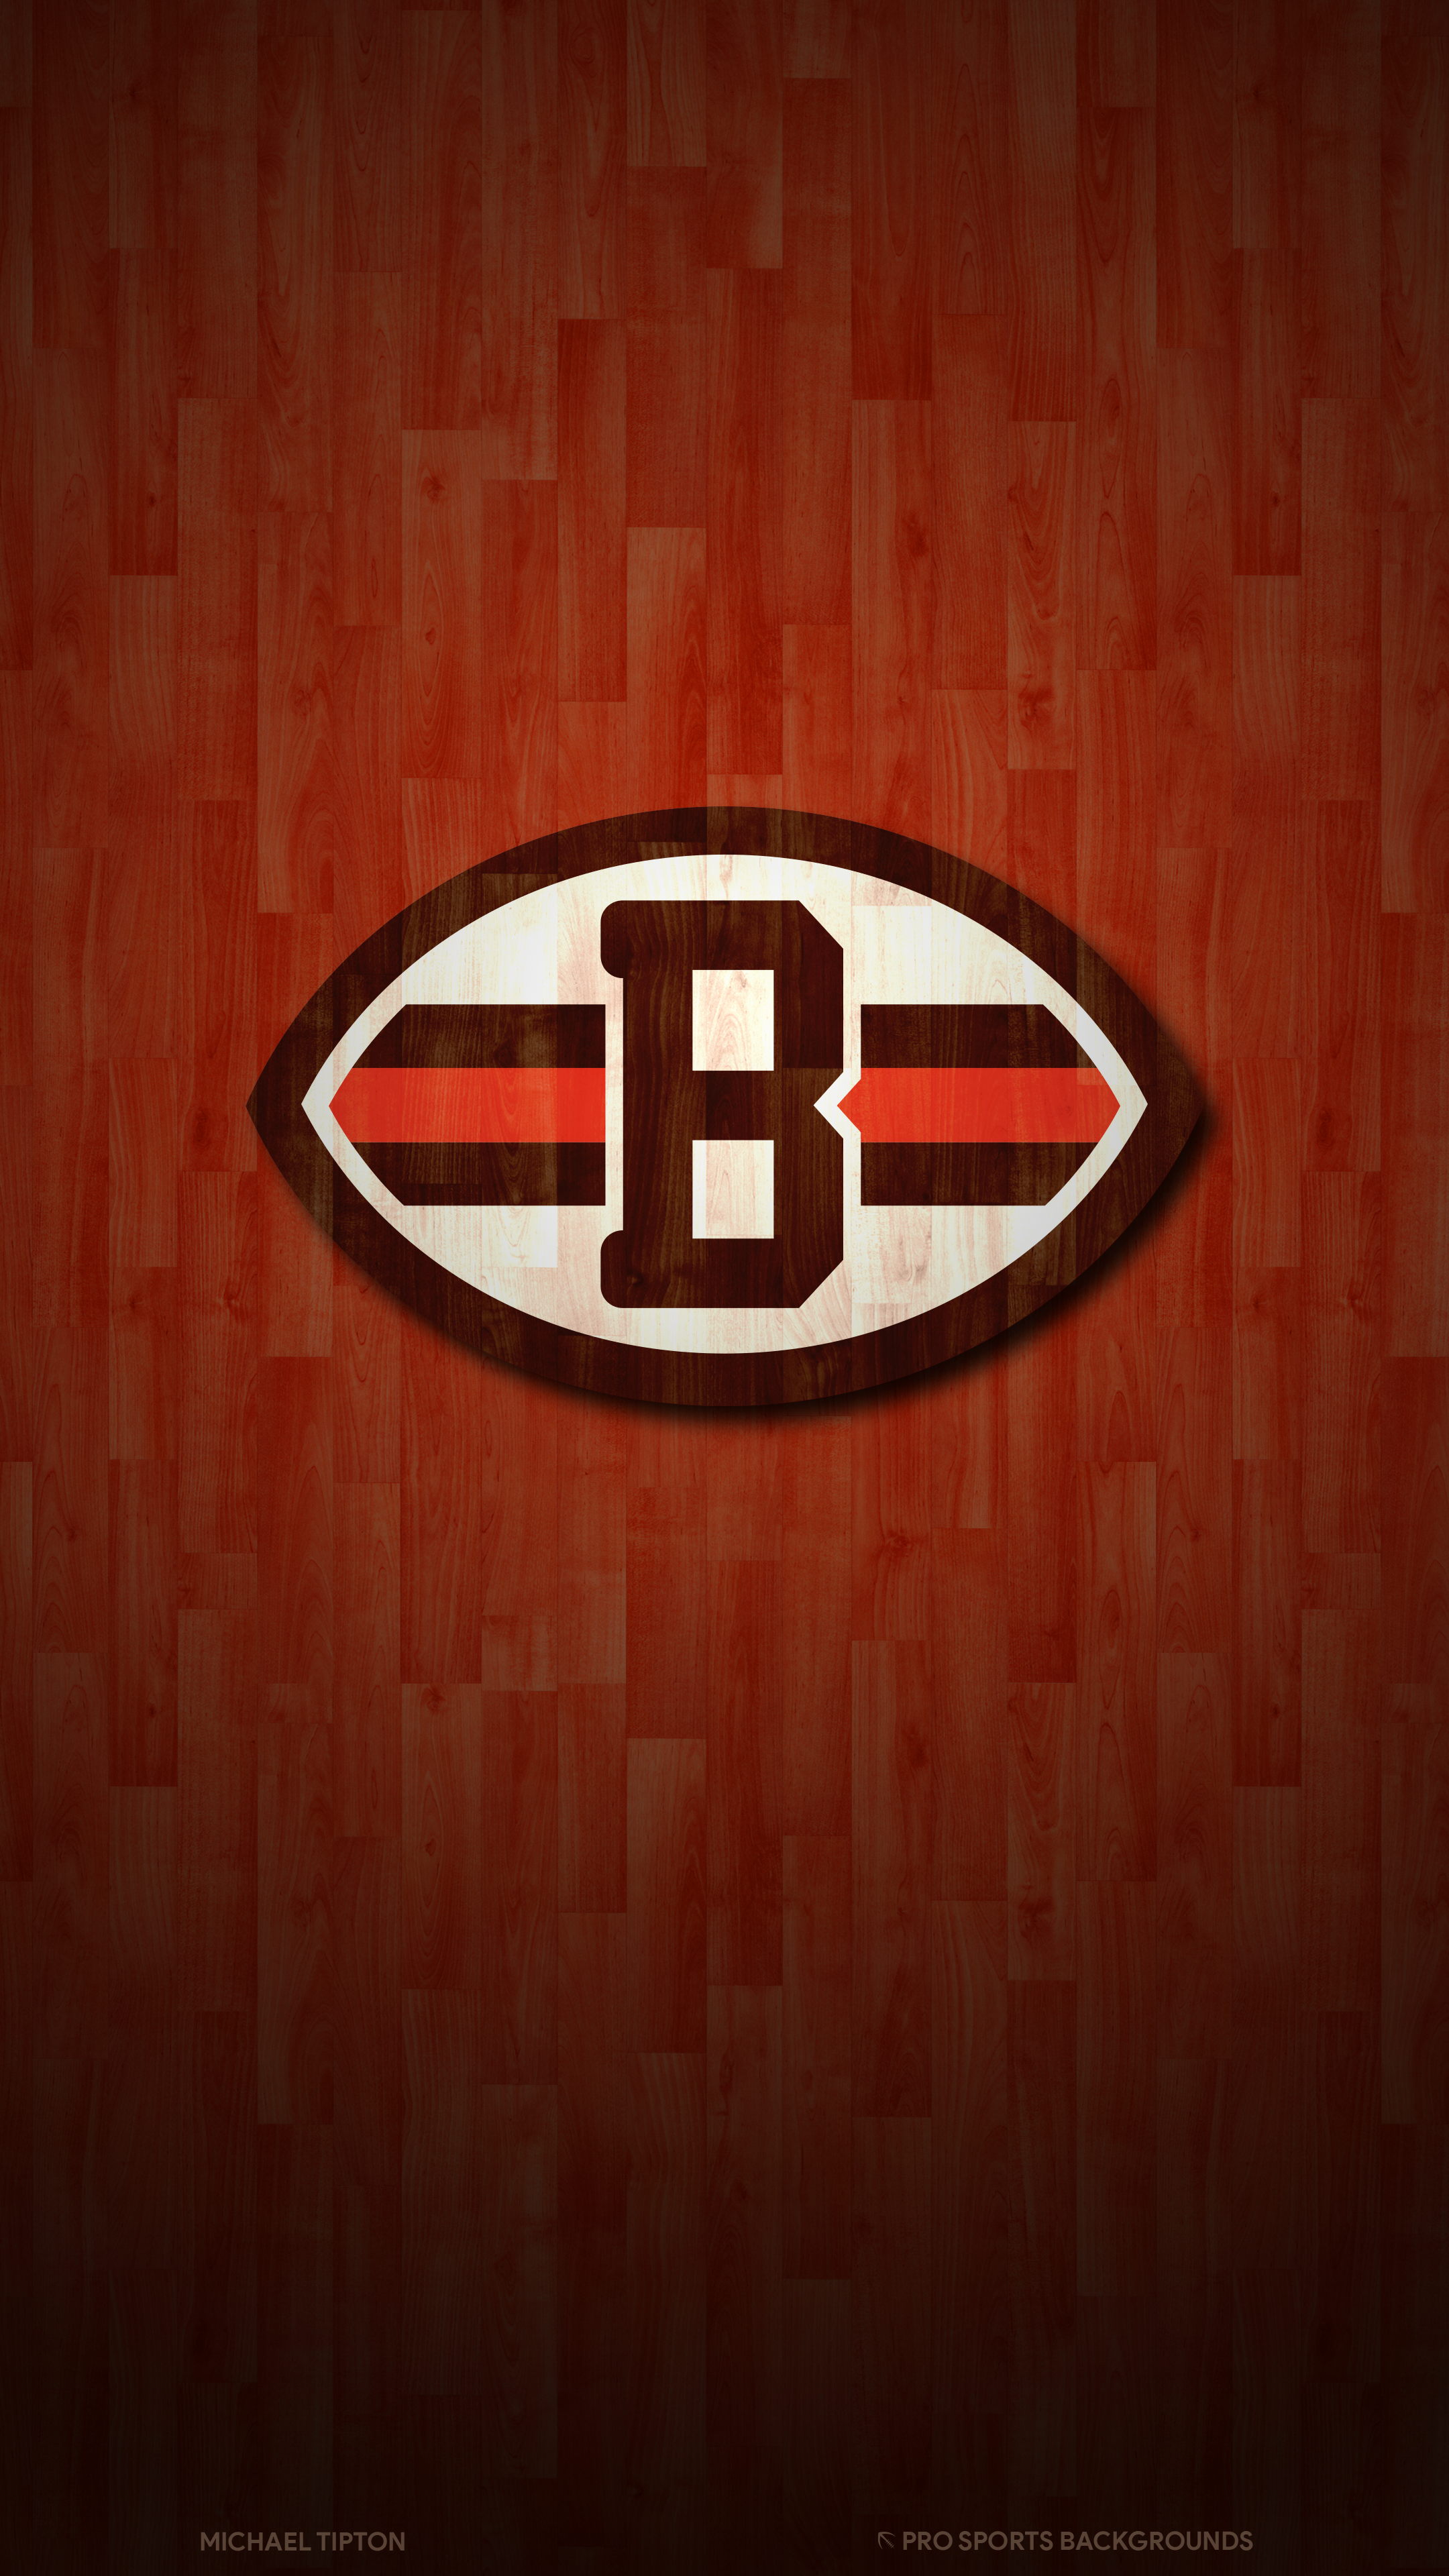 Cleveland browns wallpaper by TCB2177 - Download on ZEDGE™